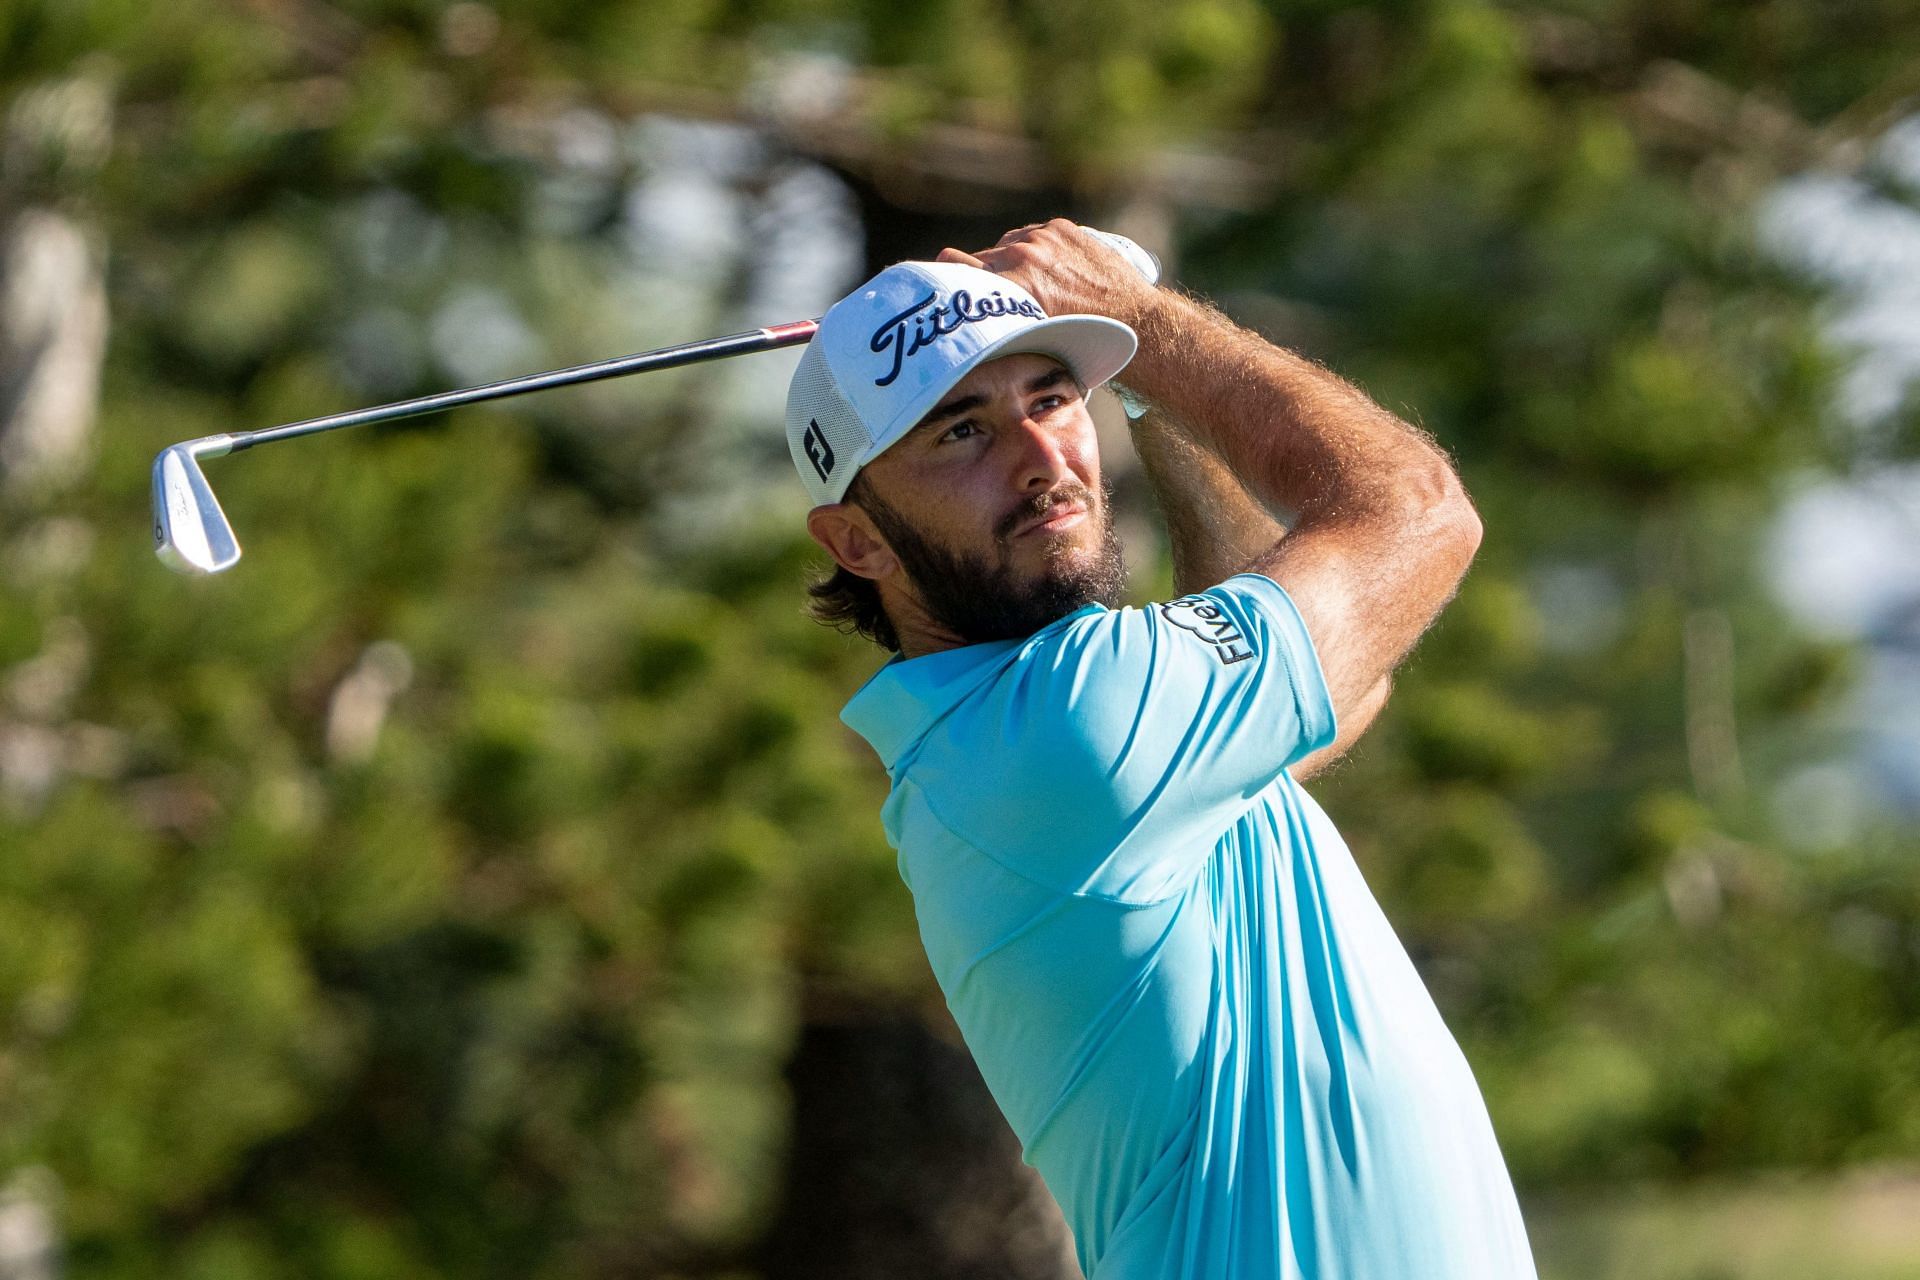 Max Homa is tied for 4th after 3rd day at Farmers Insurance Open